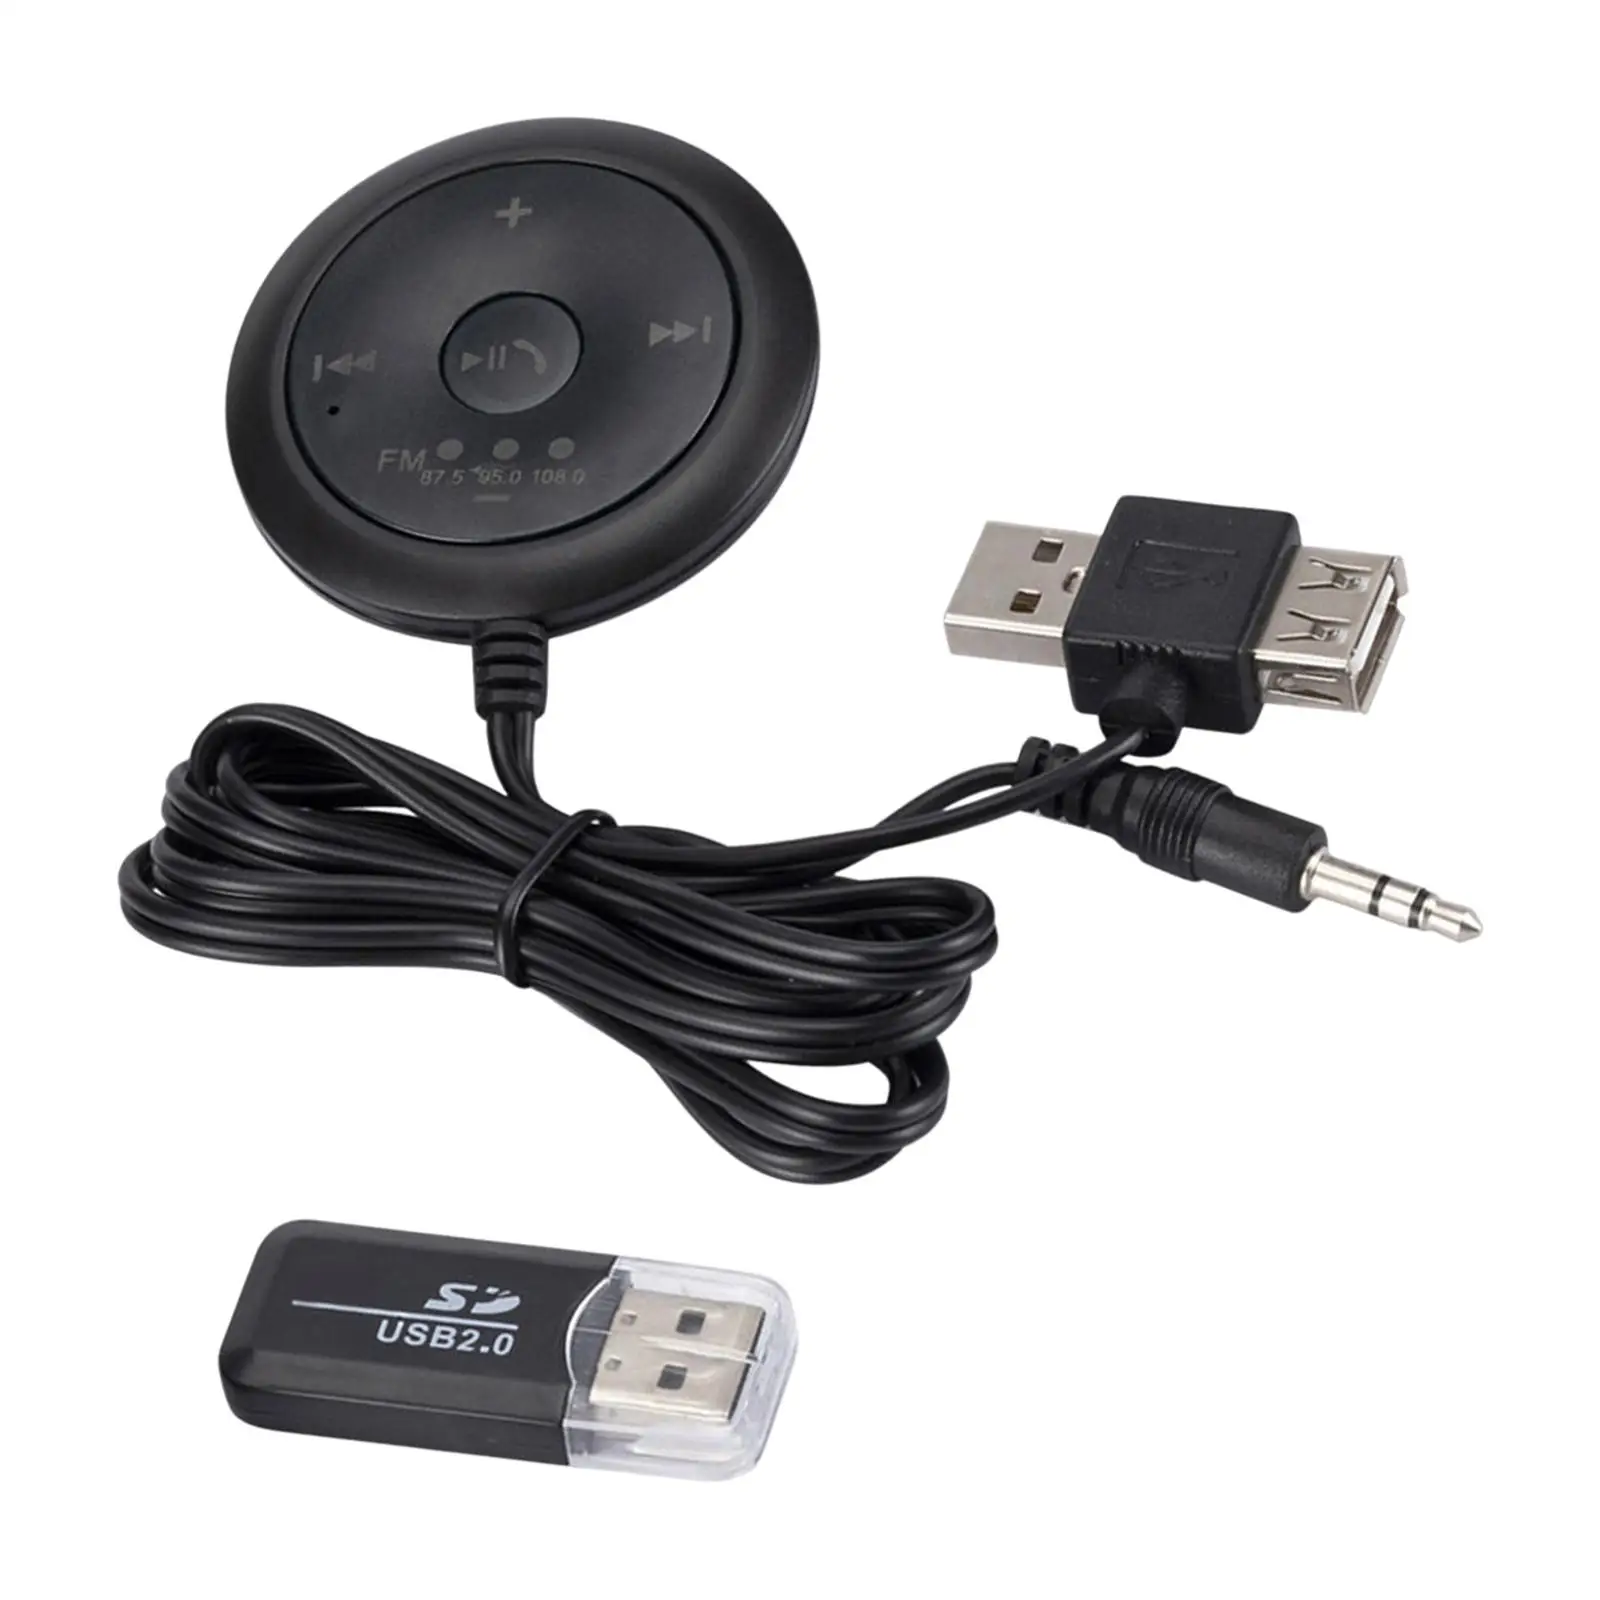 Receiver and Transmitter Adapter Kit Bluetooth Set for Car Hands-Free Call